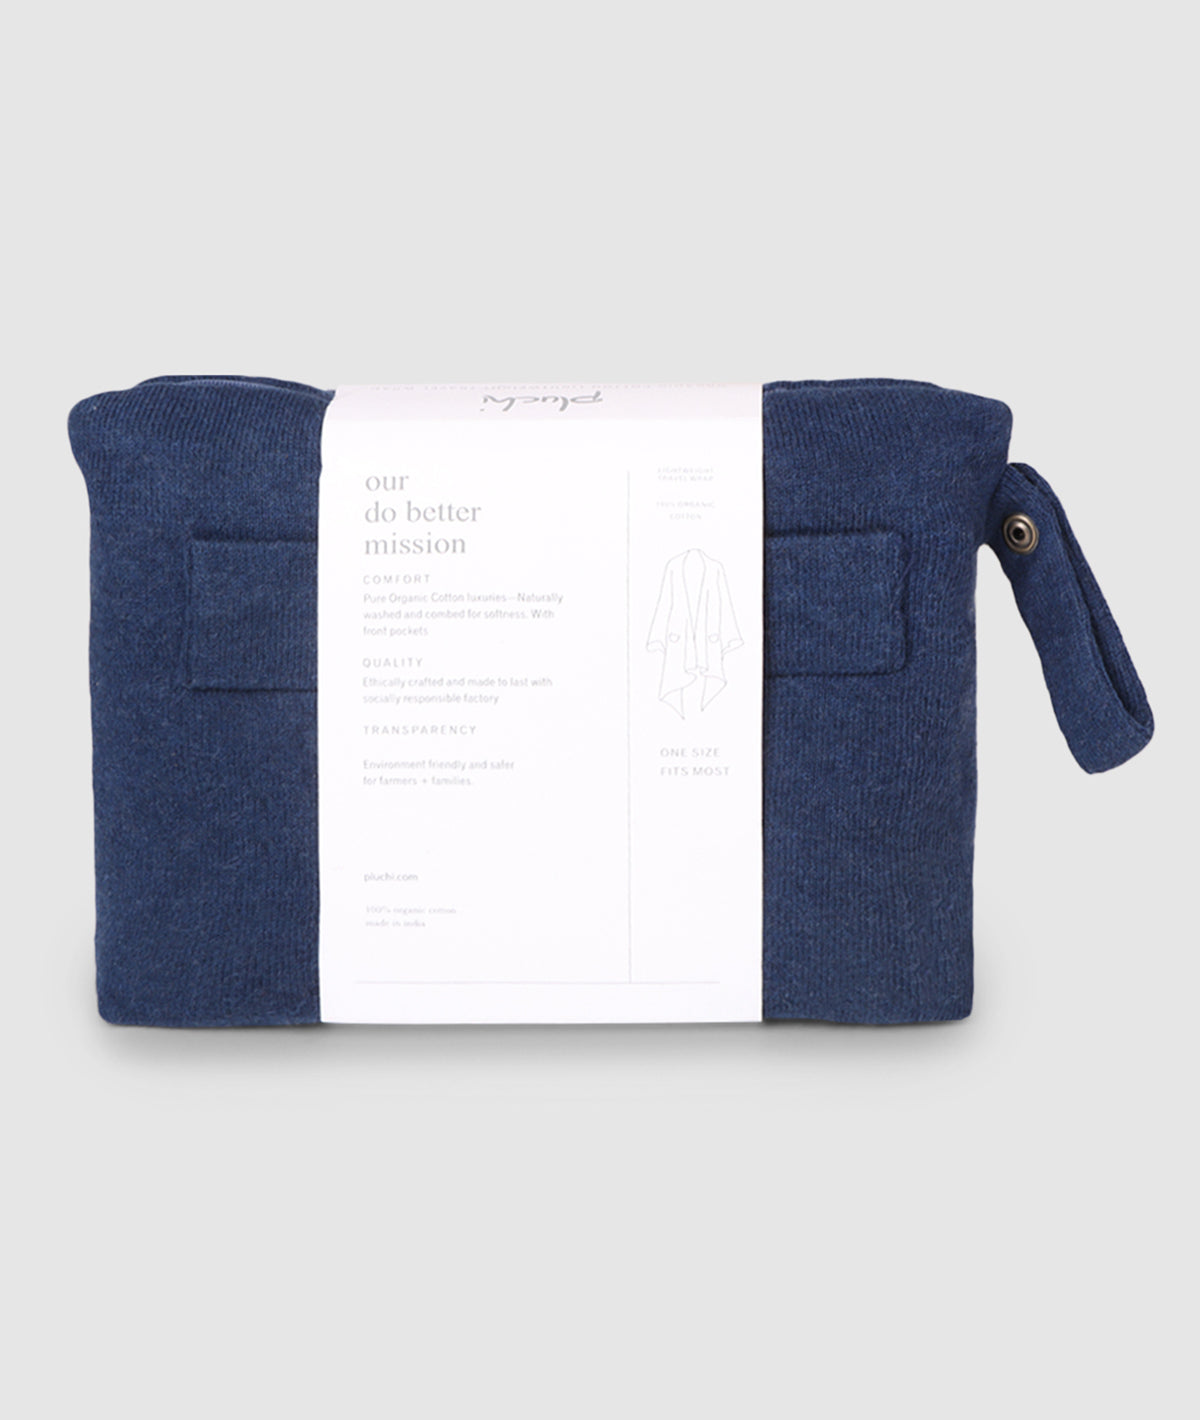 Classic Travel Cape Wrap - Organic Cotton Knitted Light Weight Wrap in Pouch (Navy Melange )